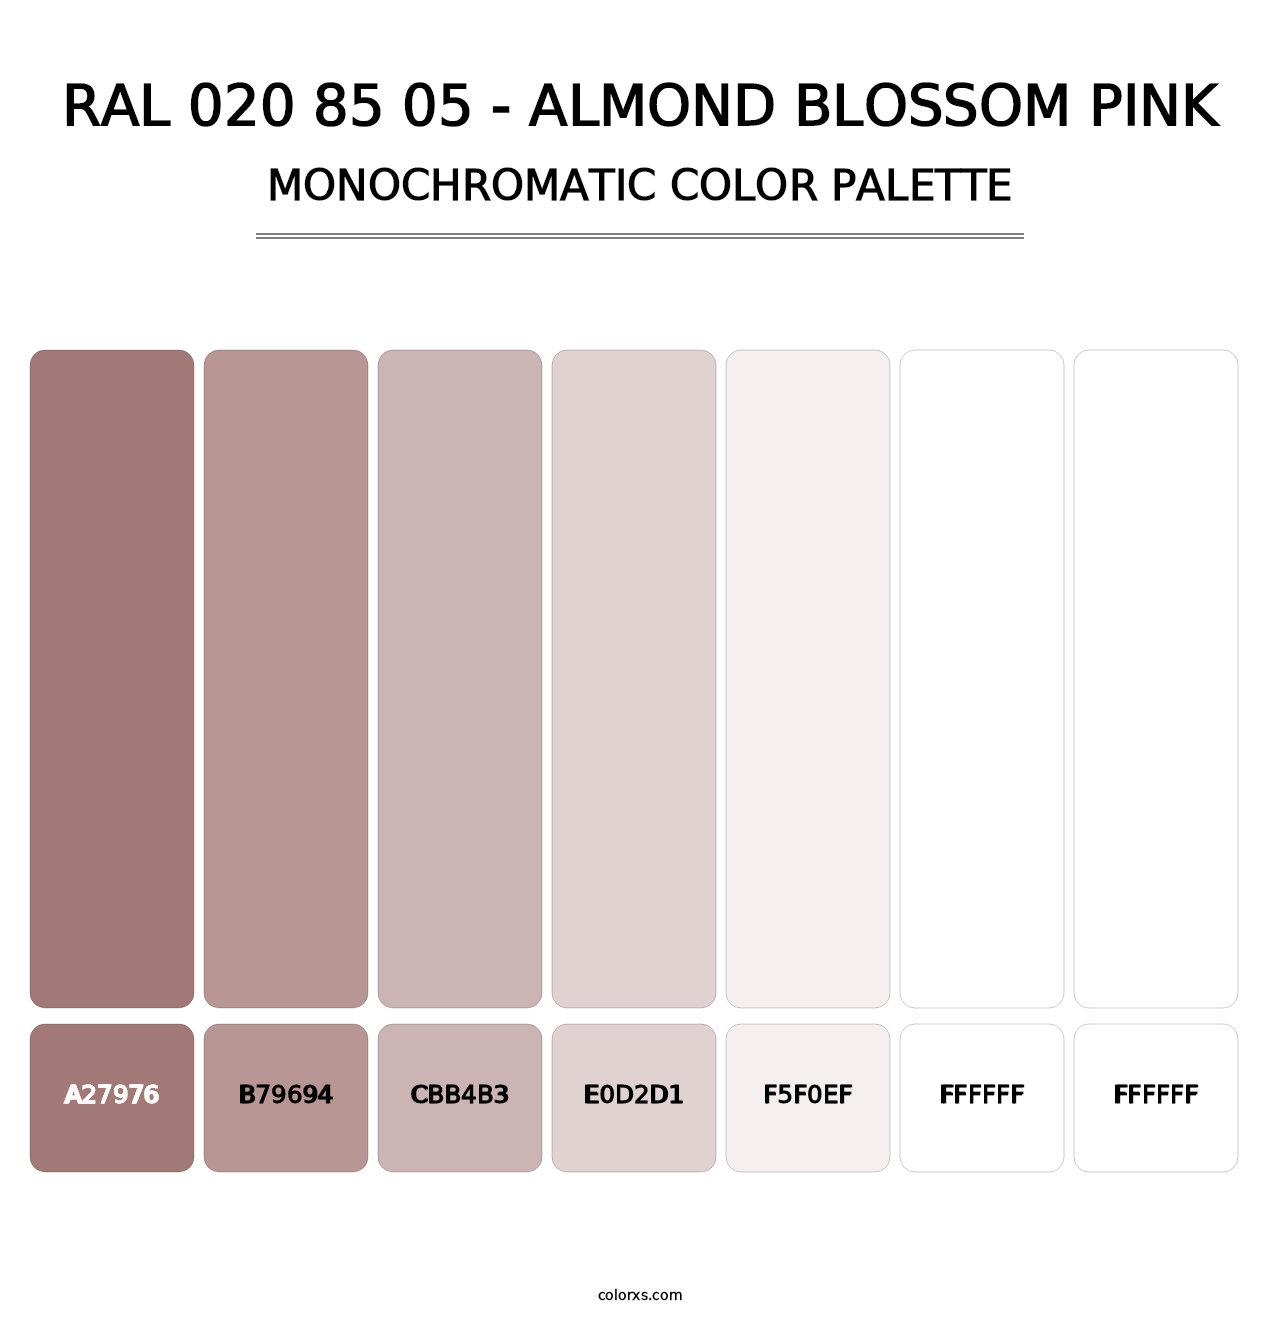 RAL 020 85 05 - Almond Blossom Pink - Monochromatic Color Palette